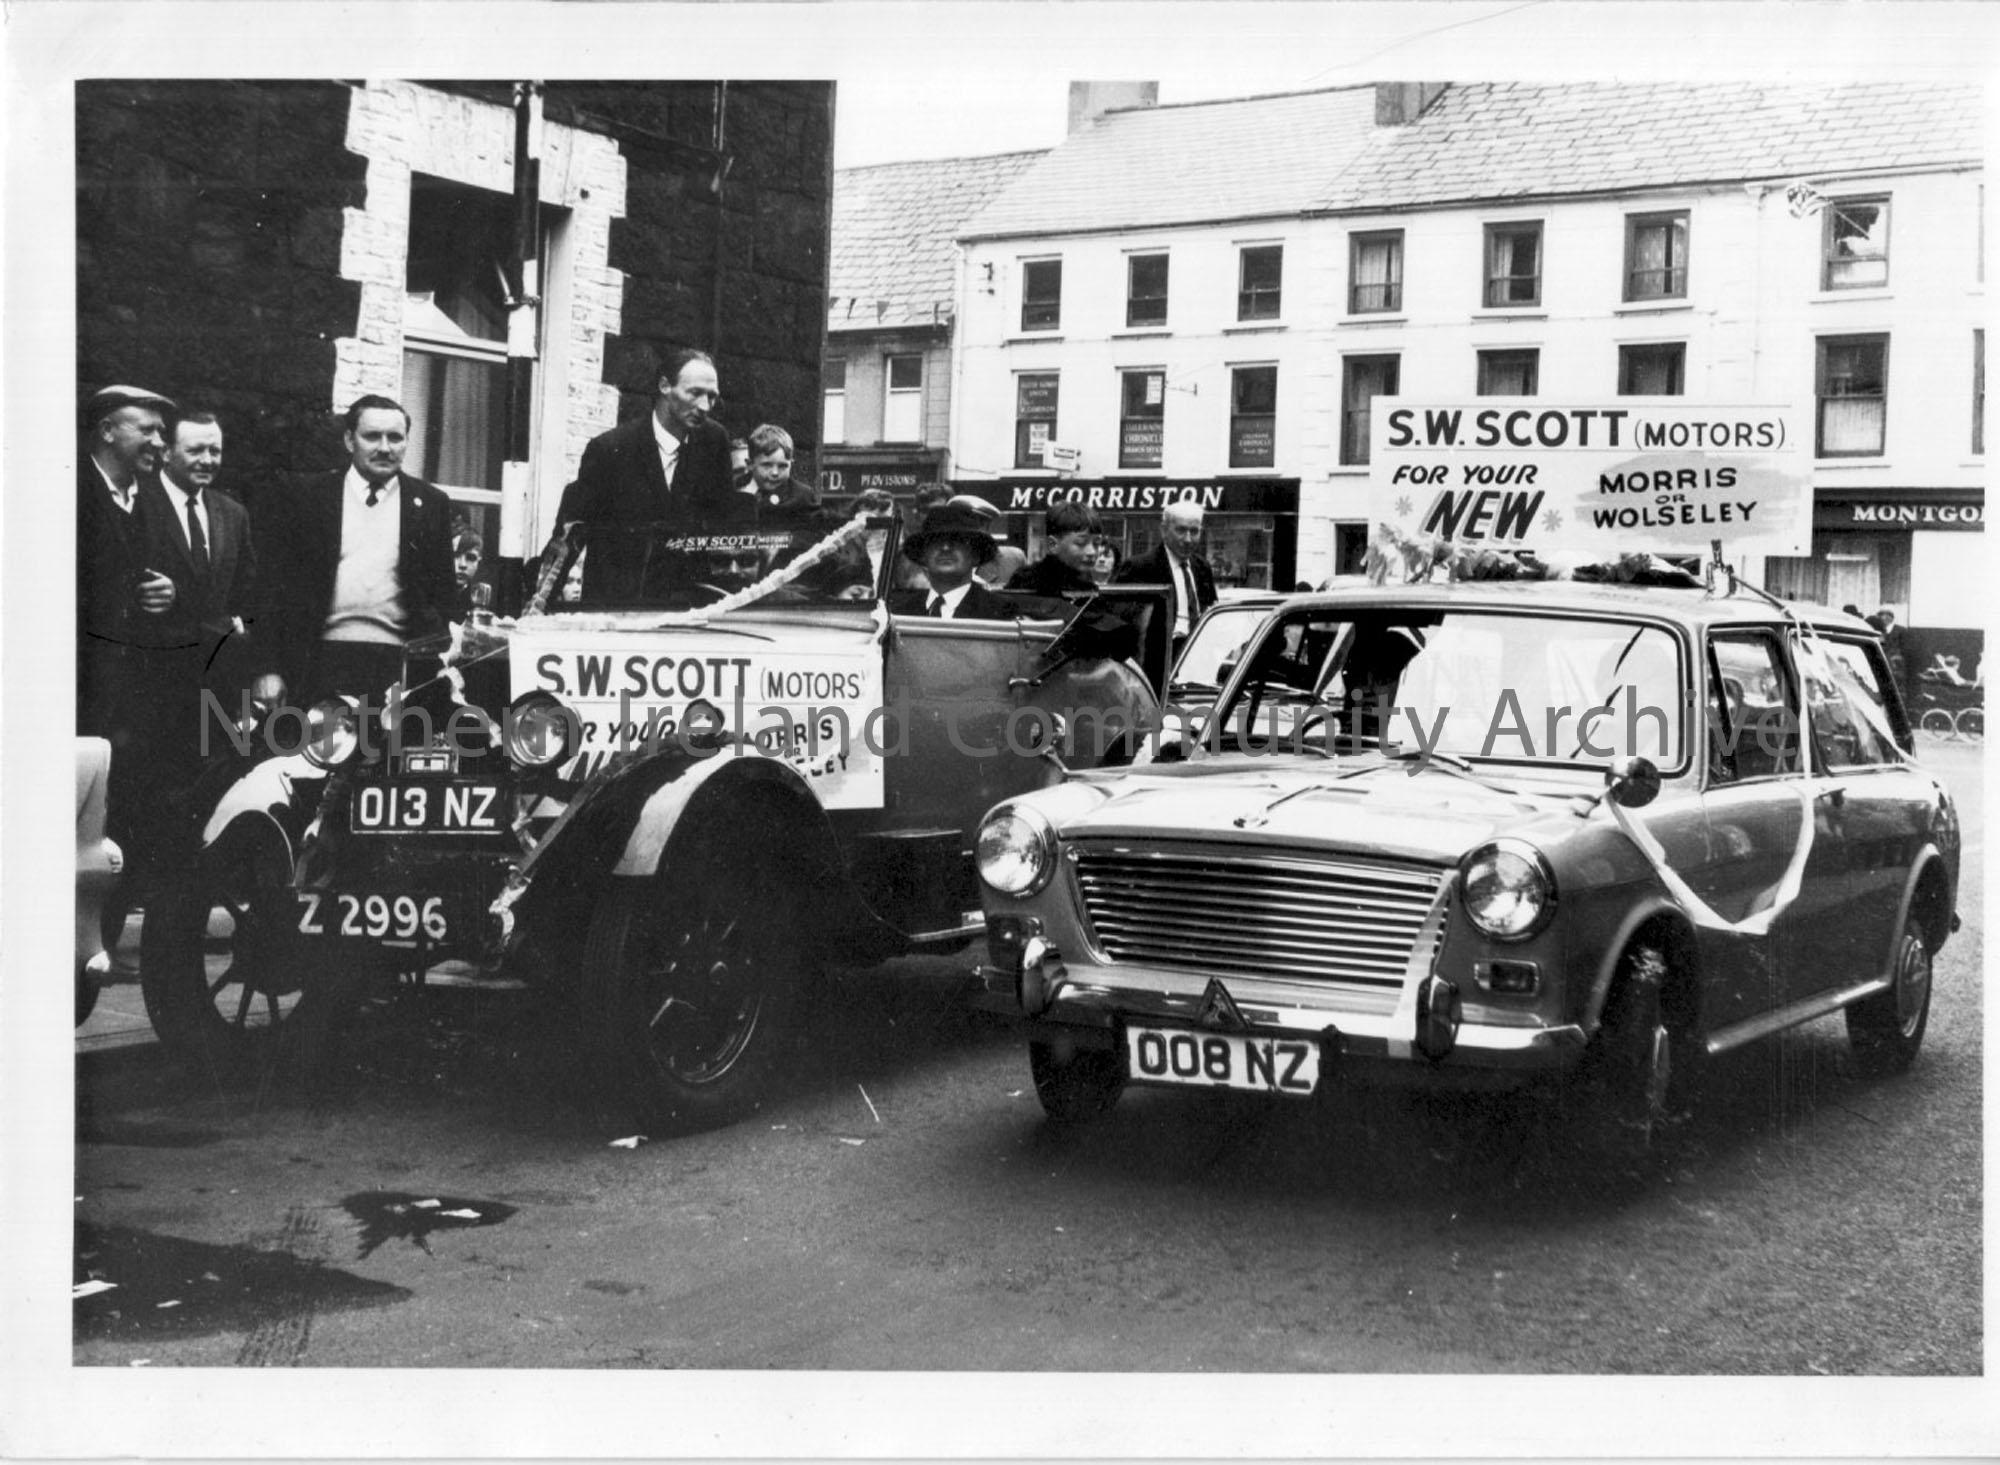 Photographic print of 2 S.W.Scott (Motors) cars with streamers and banners promoting their buisness for new Morris or Wolseley cars.